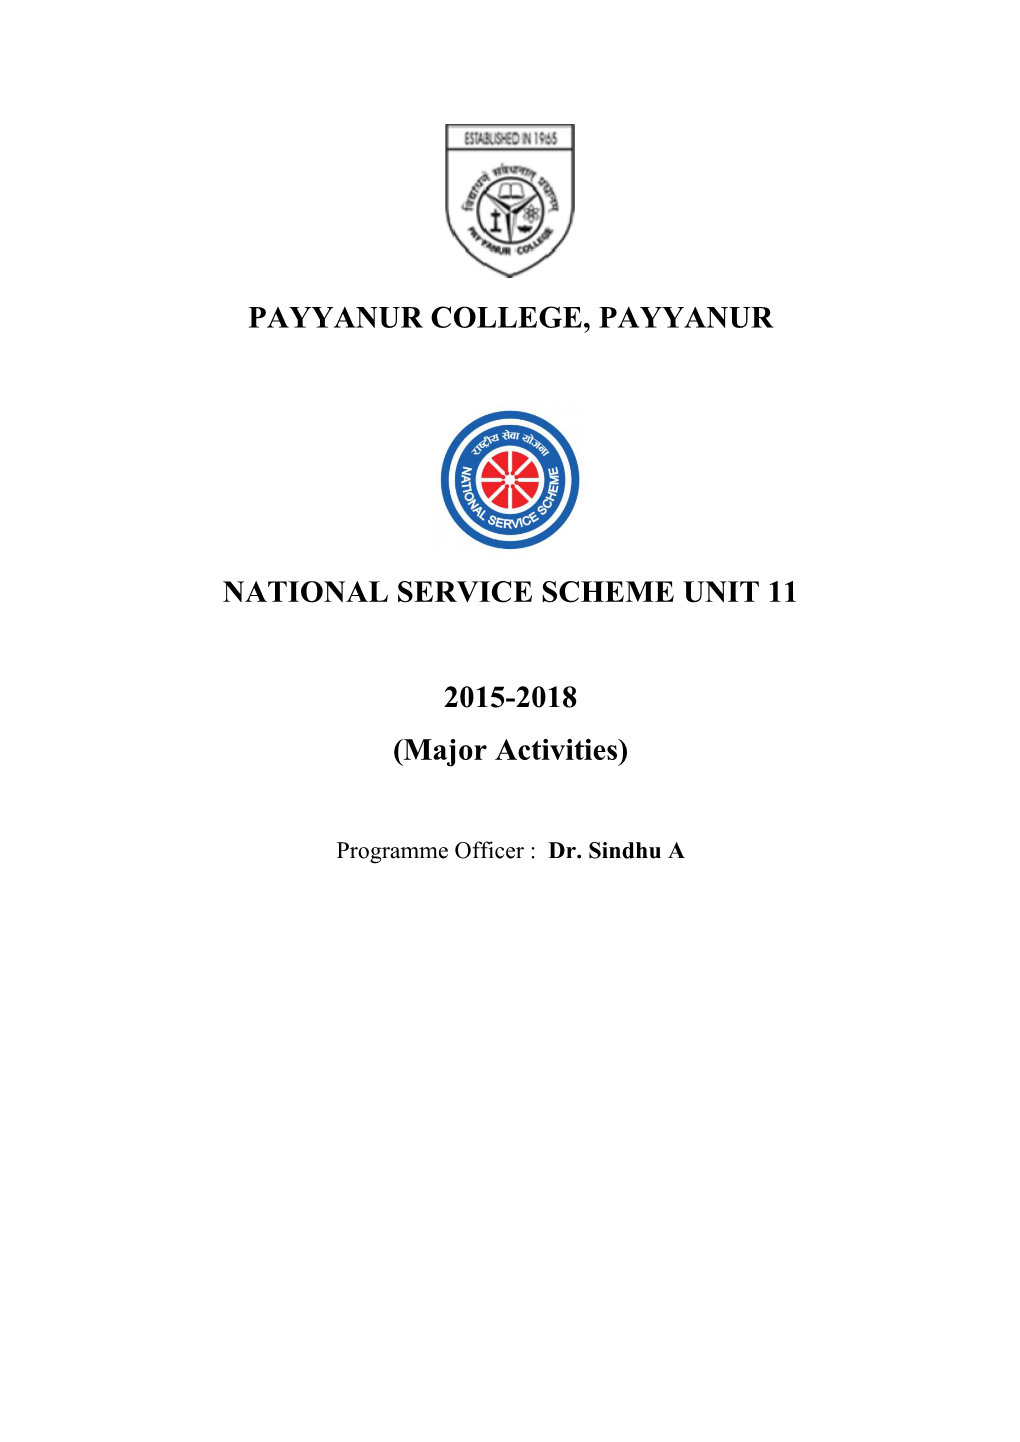 Nss 11 Report 2015-18